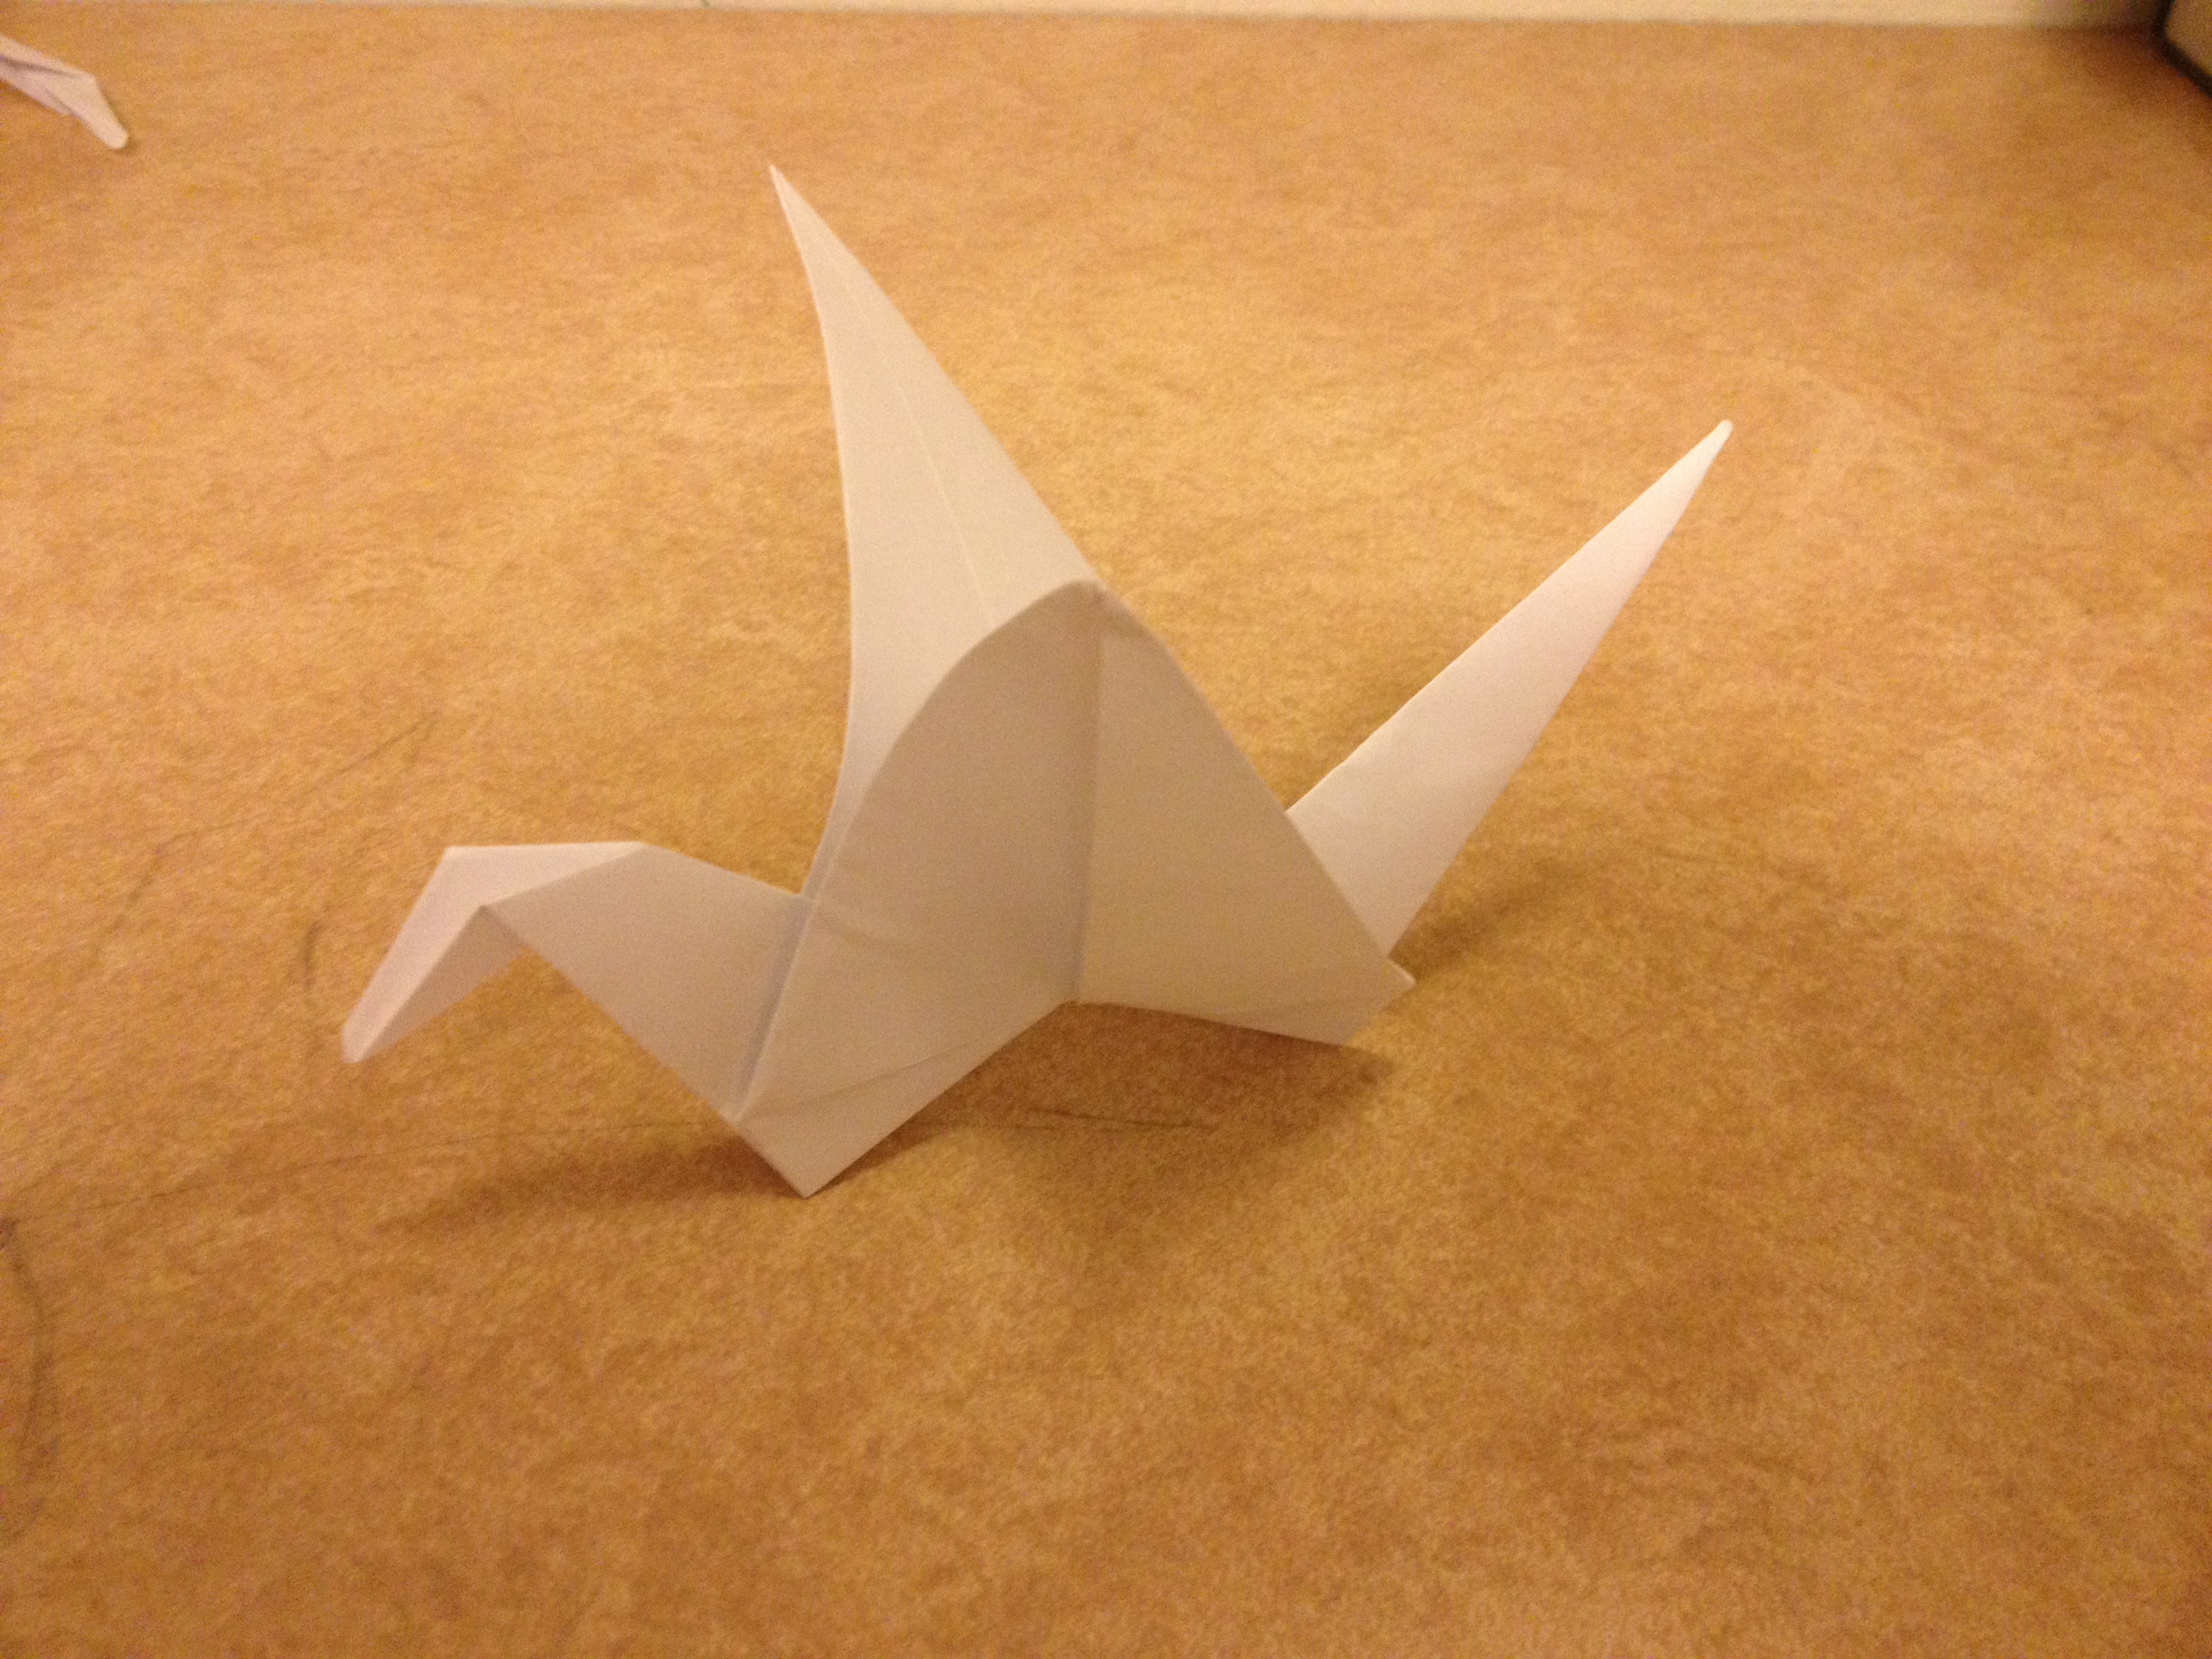 How To Make An Origami Flapping Bird Step By Step Origami Flapping Swan 7 Steps